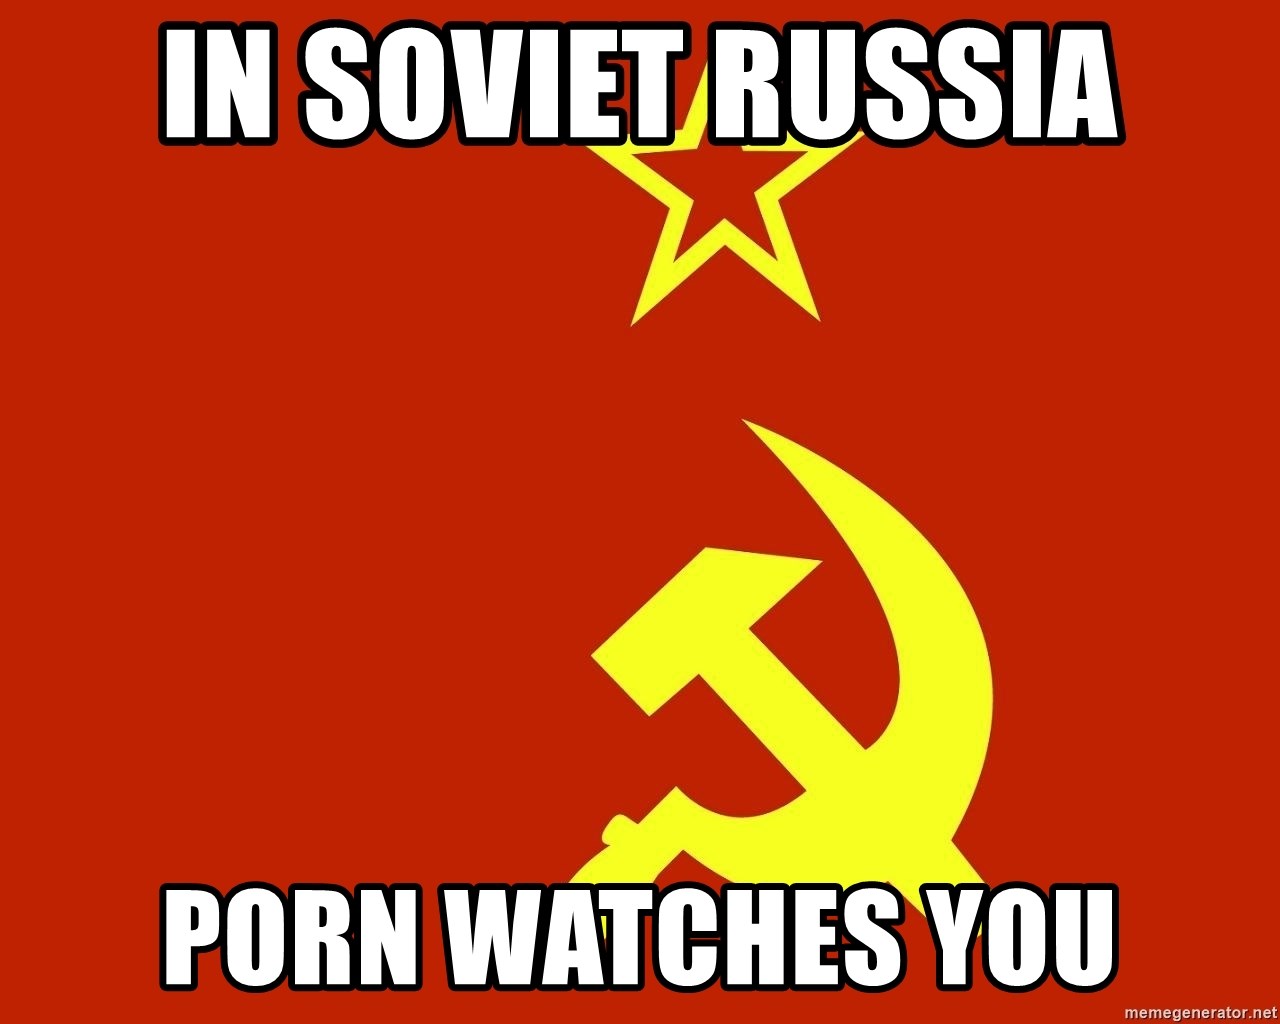 In Soviet Russia - In Soviet Russia porn watches you